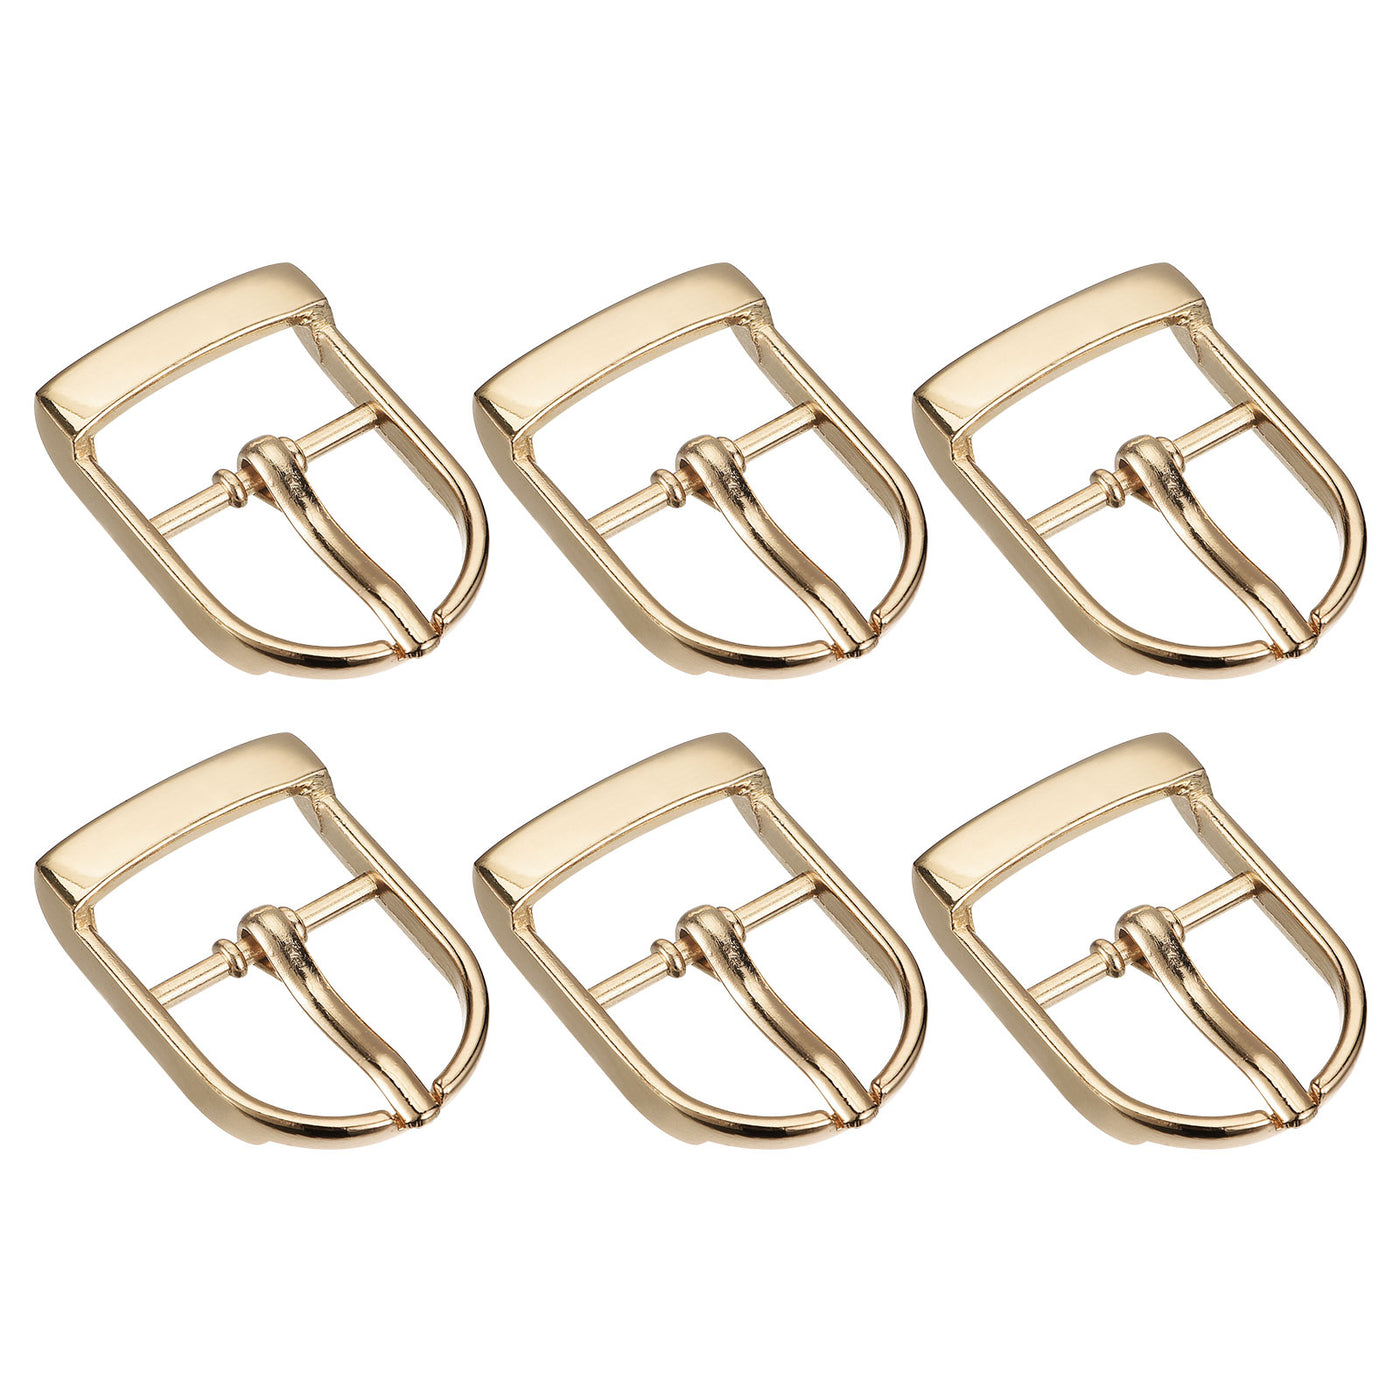 uxcell Uxcell 6Pcs 0.75" Single Prong Belt Buckle Oval Center Bar Buckles for Belts, Gold